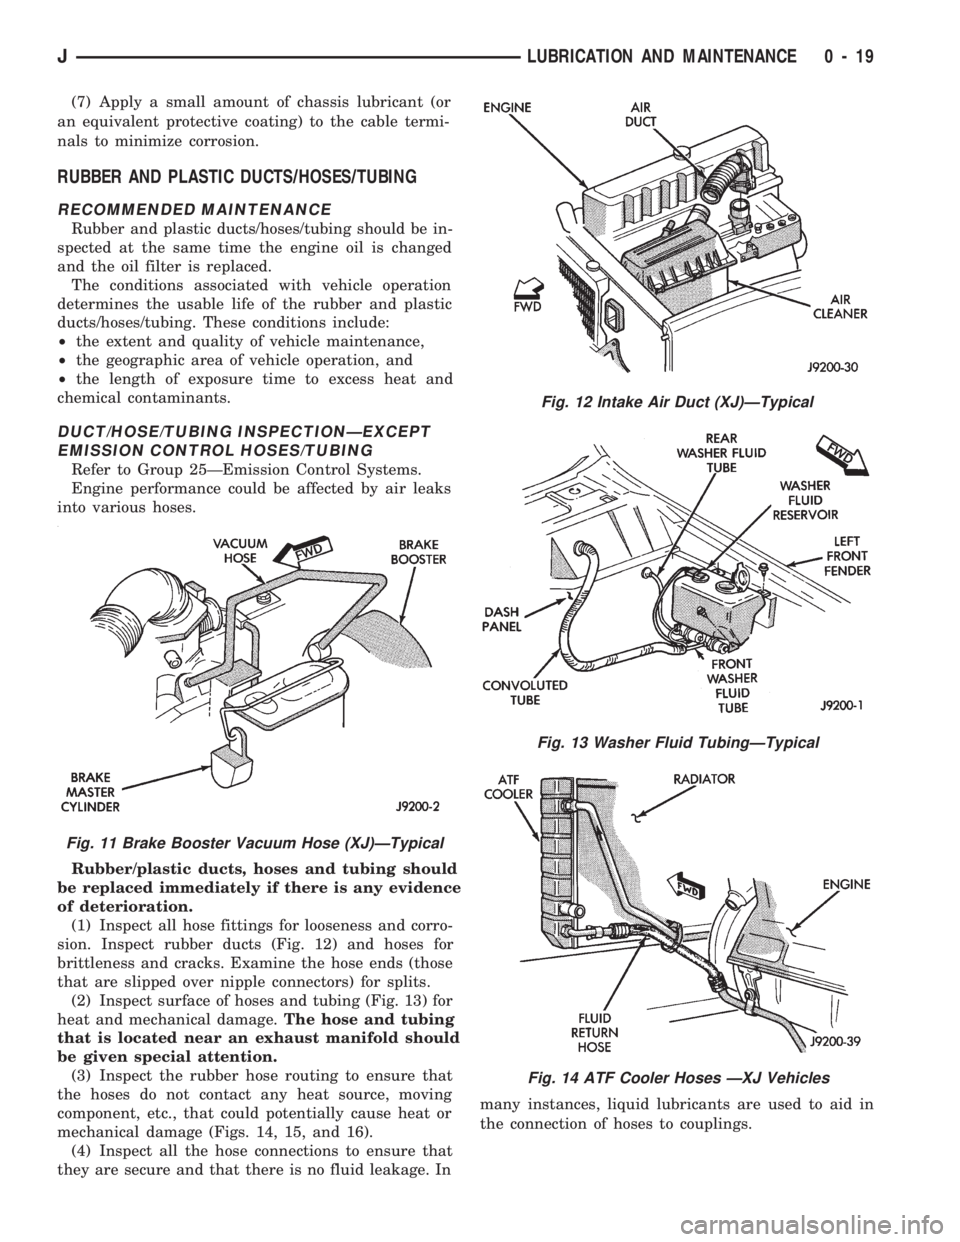 JEEP CHEROKEE 1994  Service User Guide (7) Apply a small amount of chassis lubricant (or
an equivalent protective coating) to the cable termi-
nals to minimize corrosion.
RUBBER AND PLASTIC DUCTS/HOSES/TUBING
RECOMMENDED MAINTENANCE
Rubber